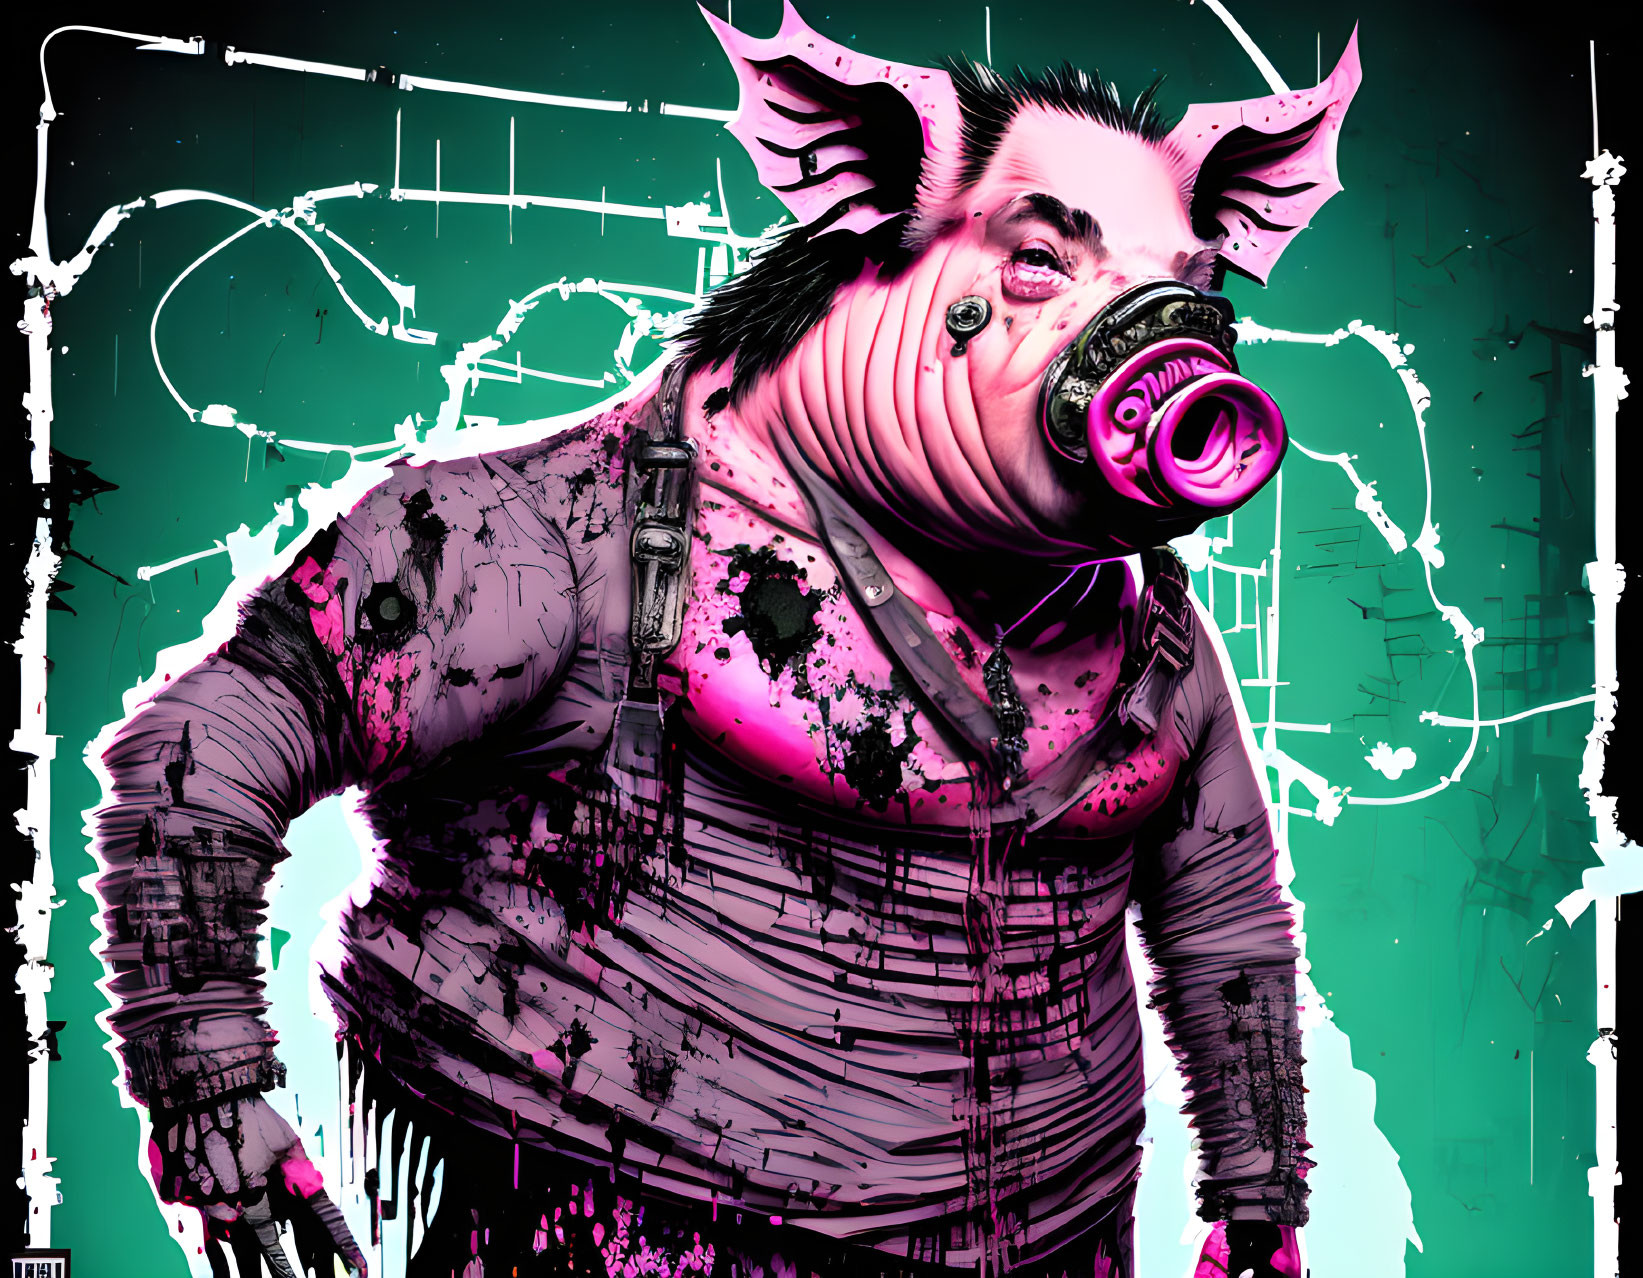 Anthropomorphic pig in gas mask with schematics on turquoise background